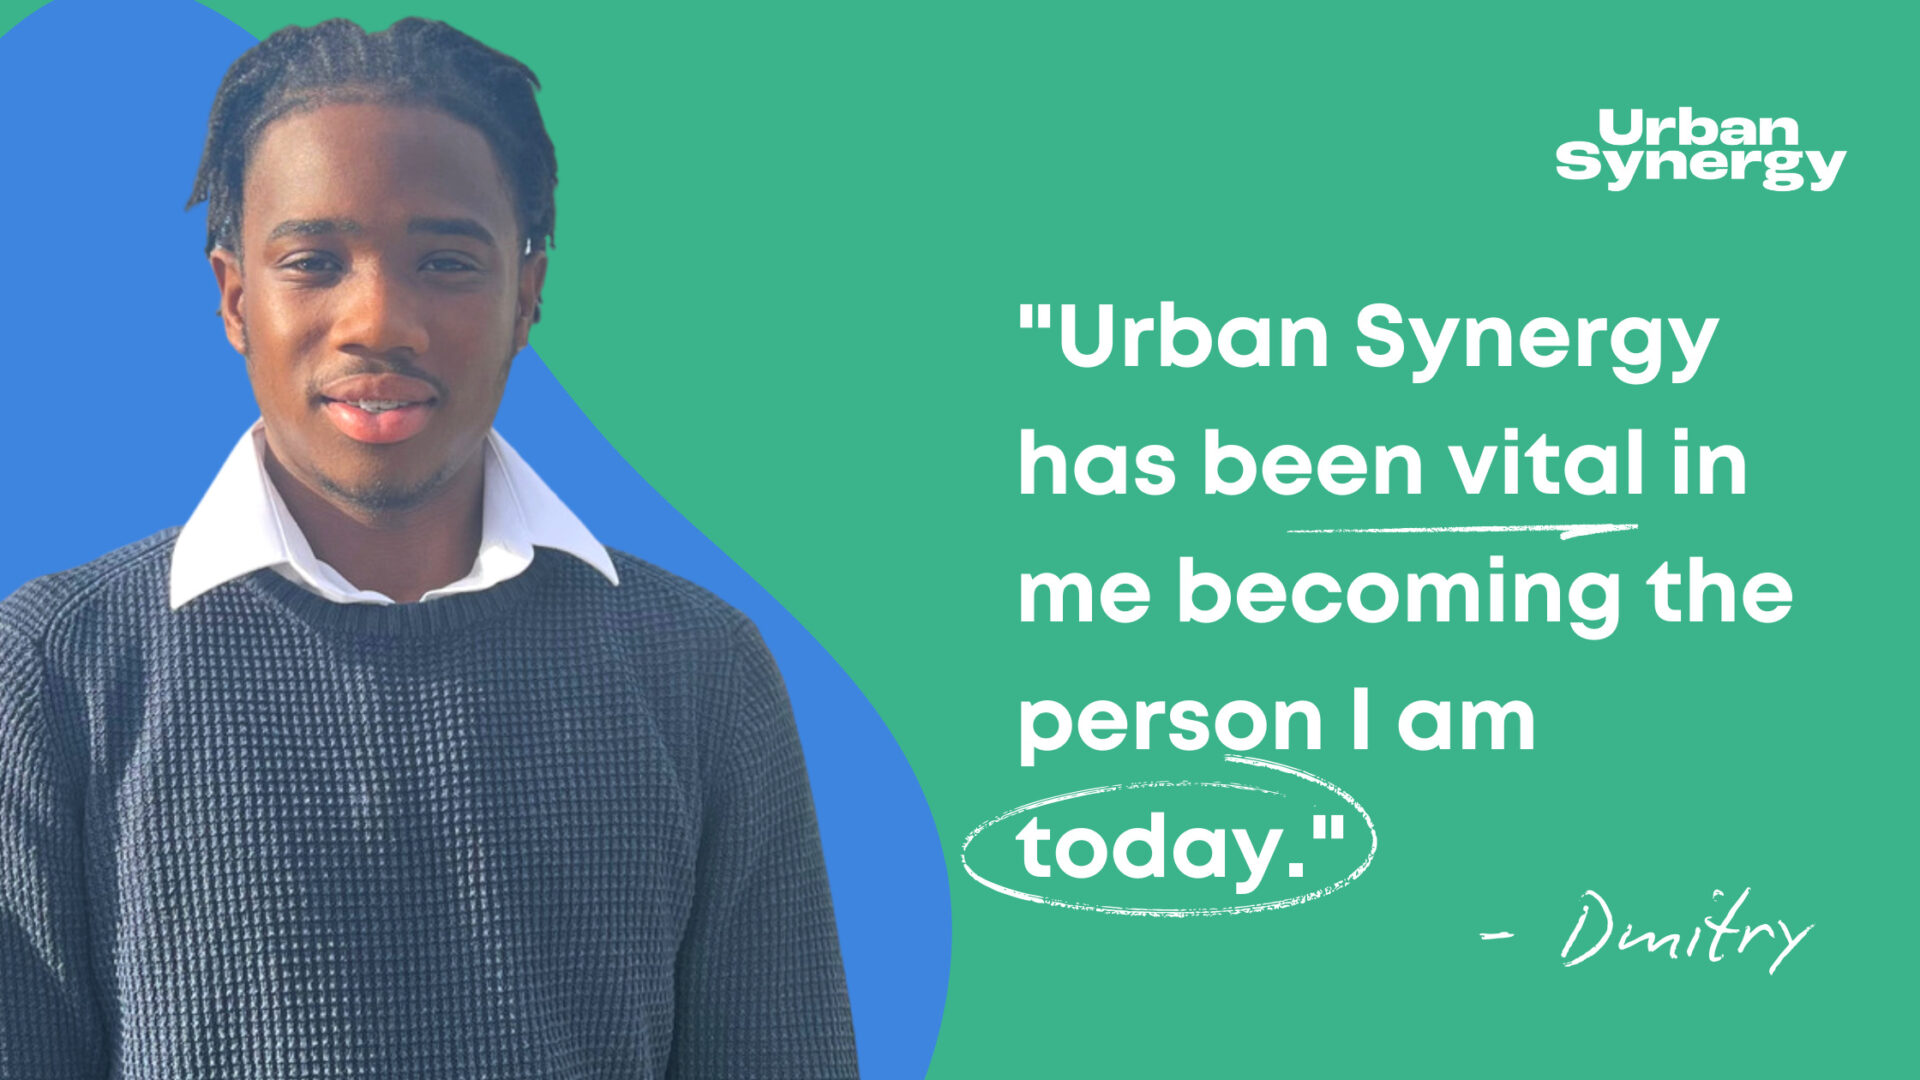 Featured image for “Urban Synergy has been vital in landing this apprenticeship and becoming the person I am today.”